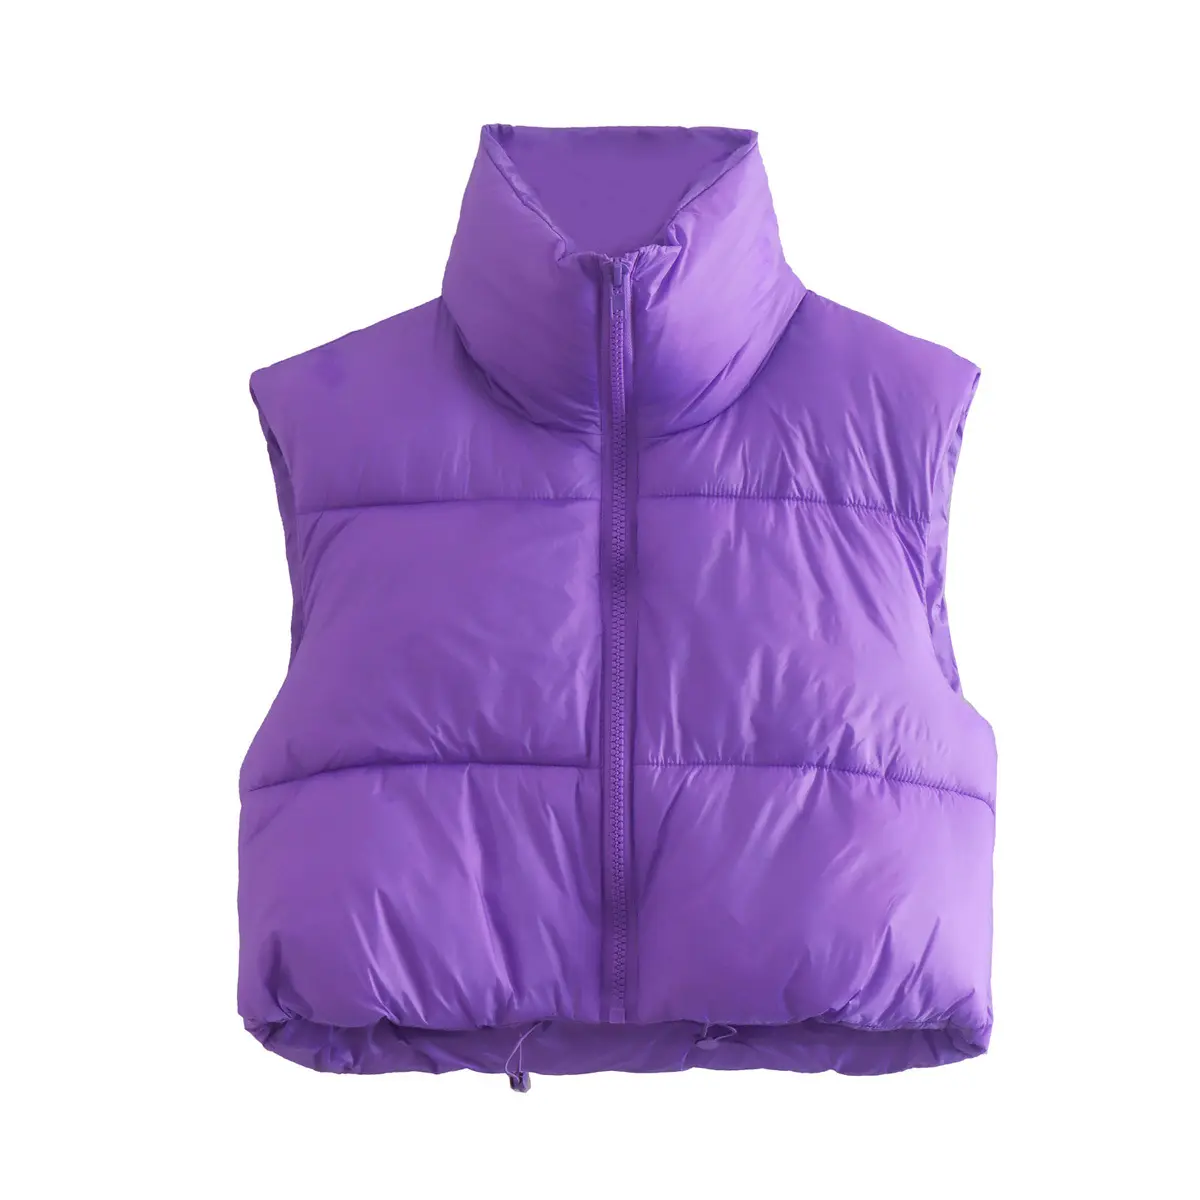 2022 New Puffy Vest Women Zip Up Stand Collar Sleeveless Lightweight Padded Cropped Puffer Quilted Vest Winter Warm Coat Jacket